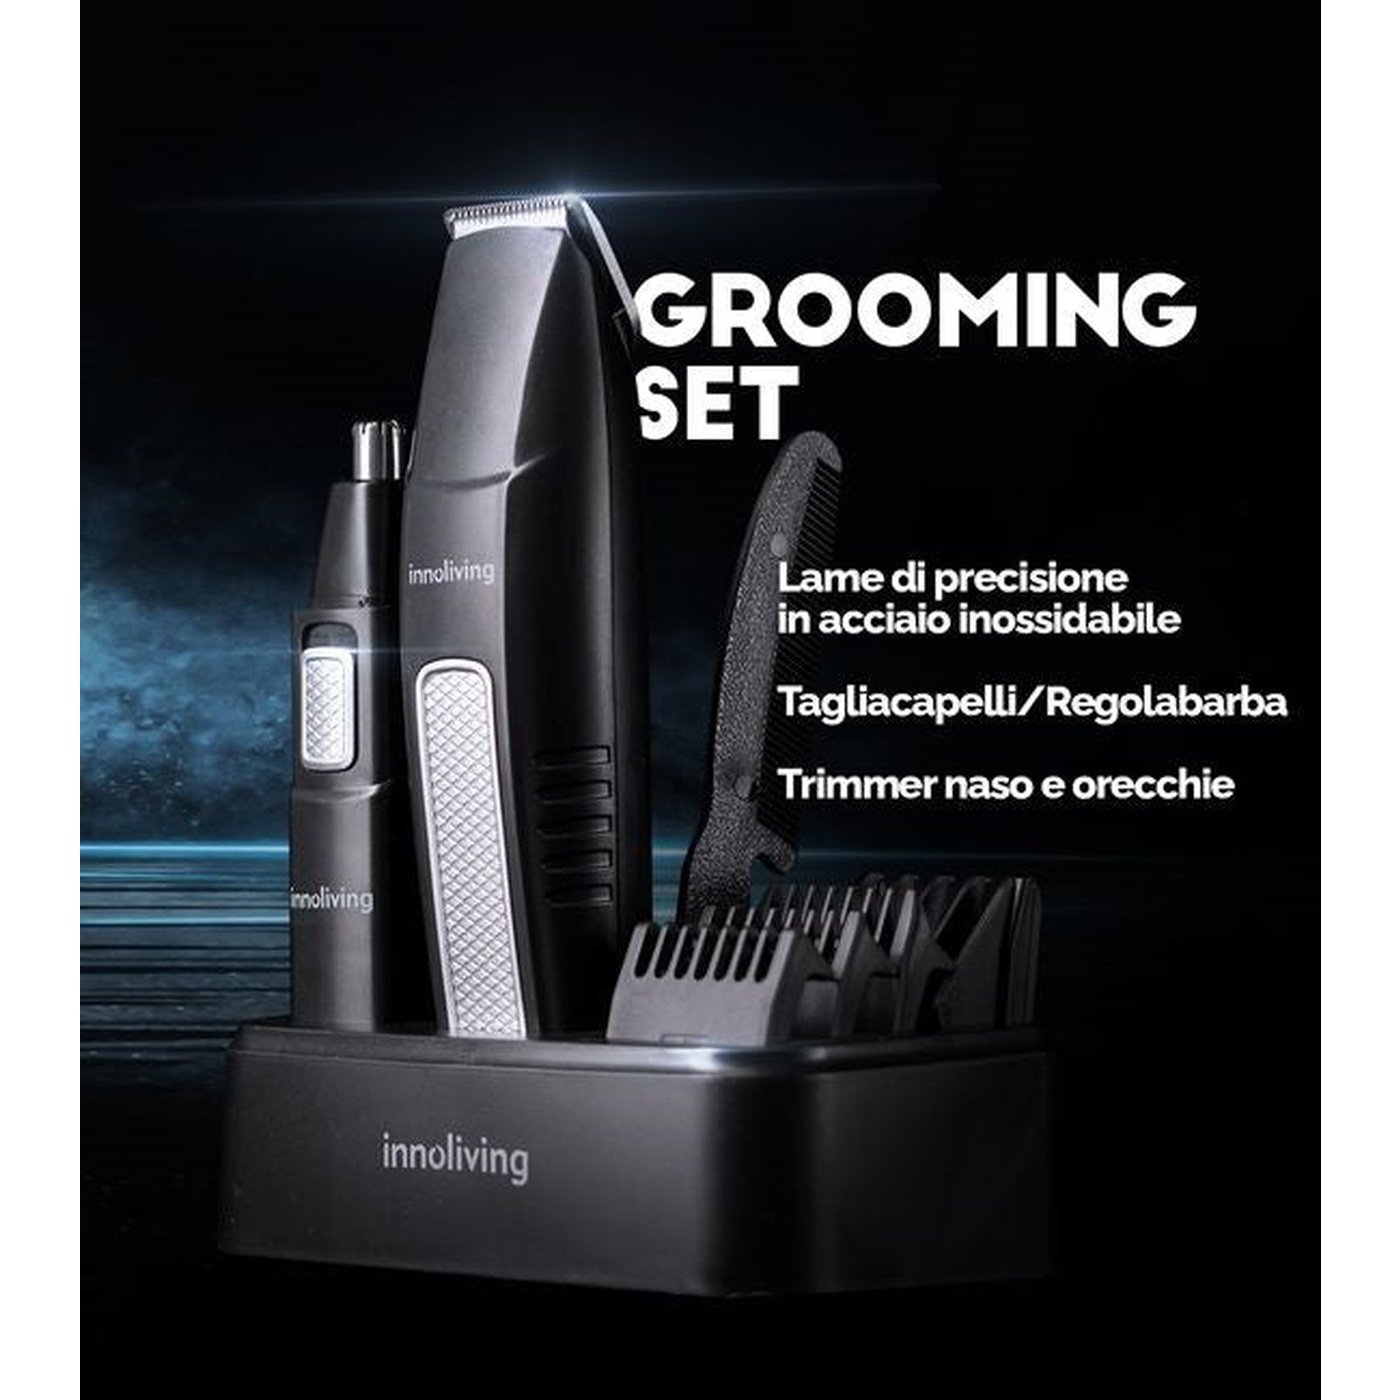 Set 3in1 Hair clipper/Beard trimmer and Trimmer cutting guides included, Innoliving INN-616